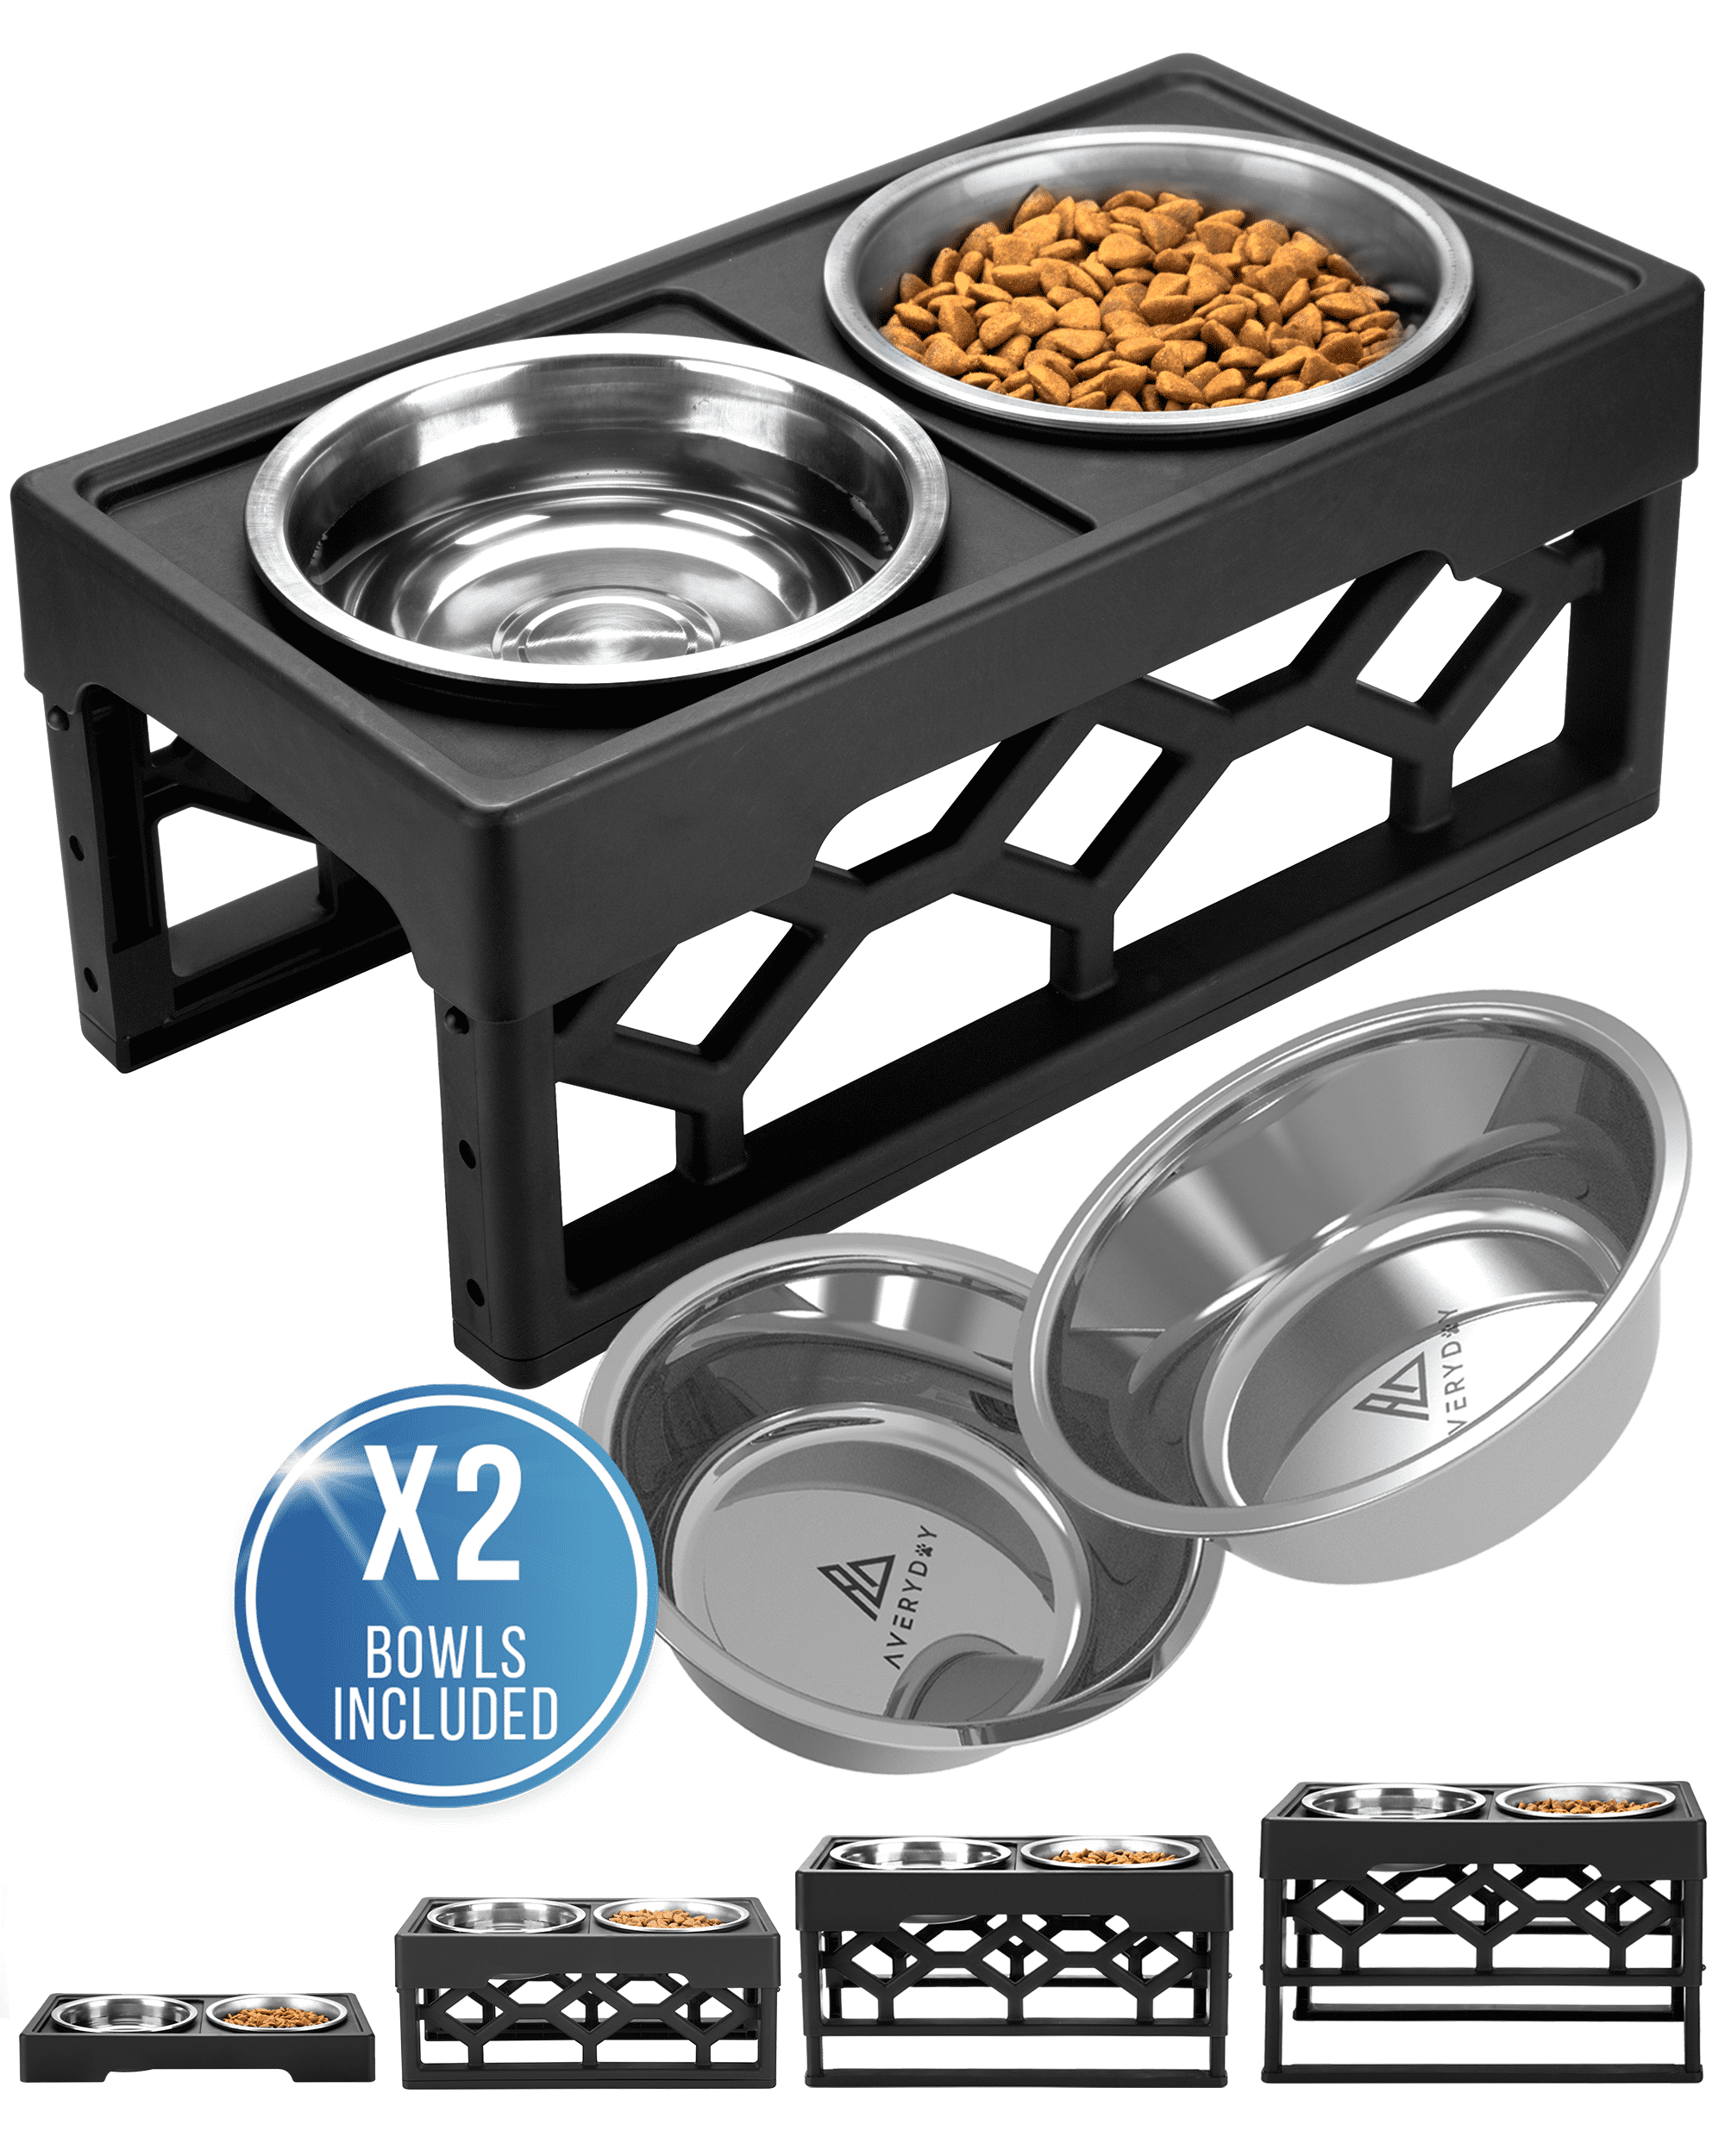 AveryDay Adjustable Elevated Dog Bowls- 4 Heights & 2 Stainless